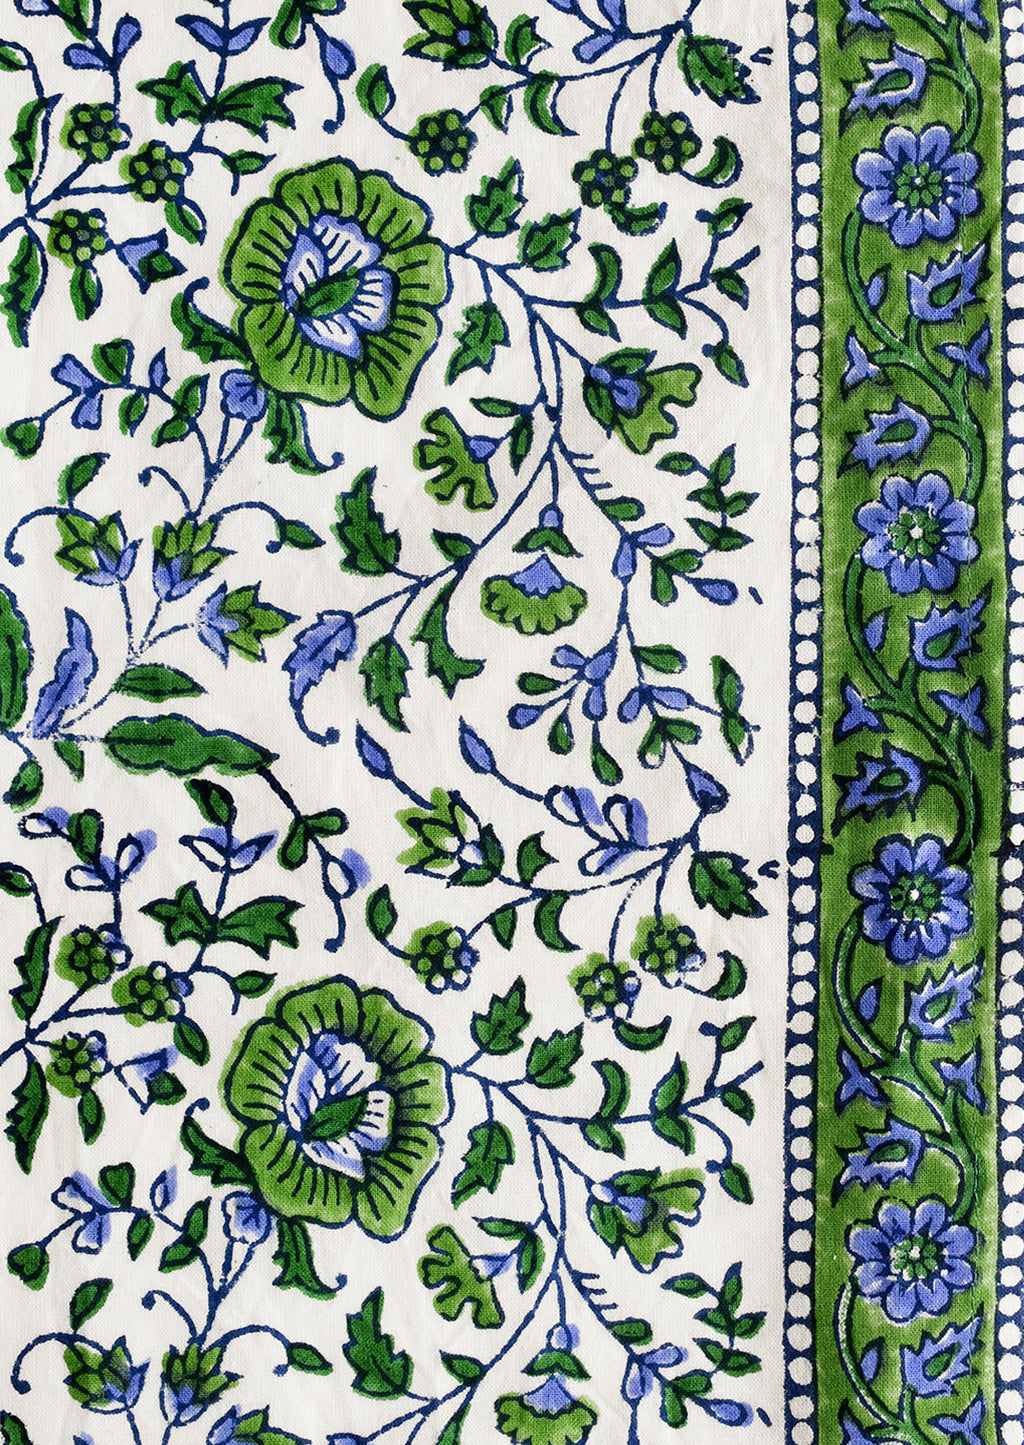 2: A block printed blue and green floral print with border.